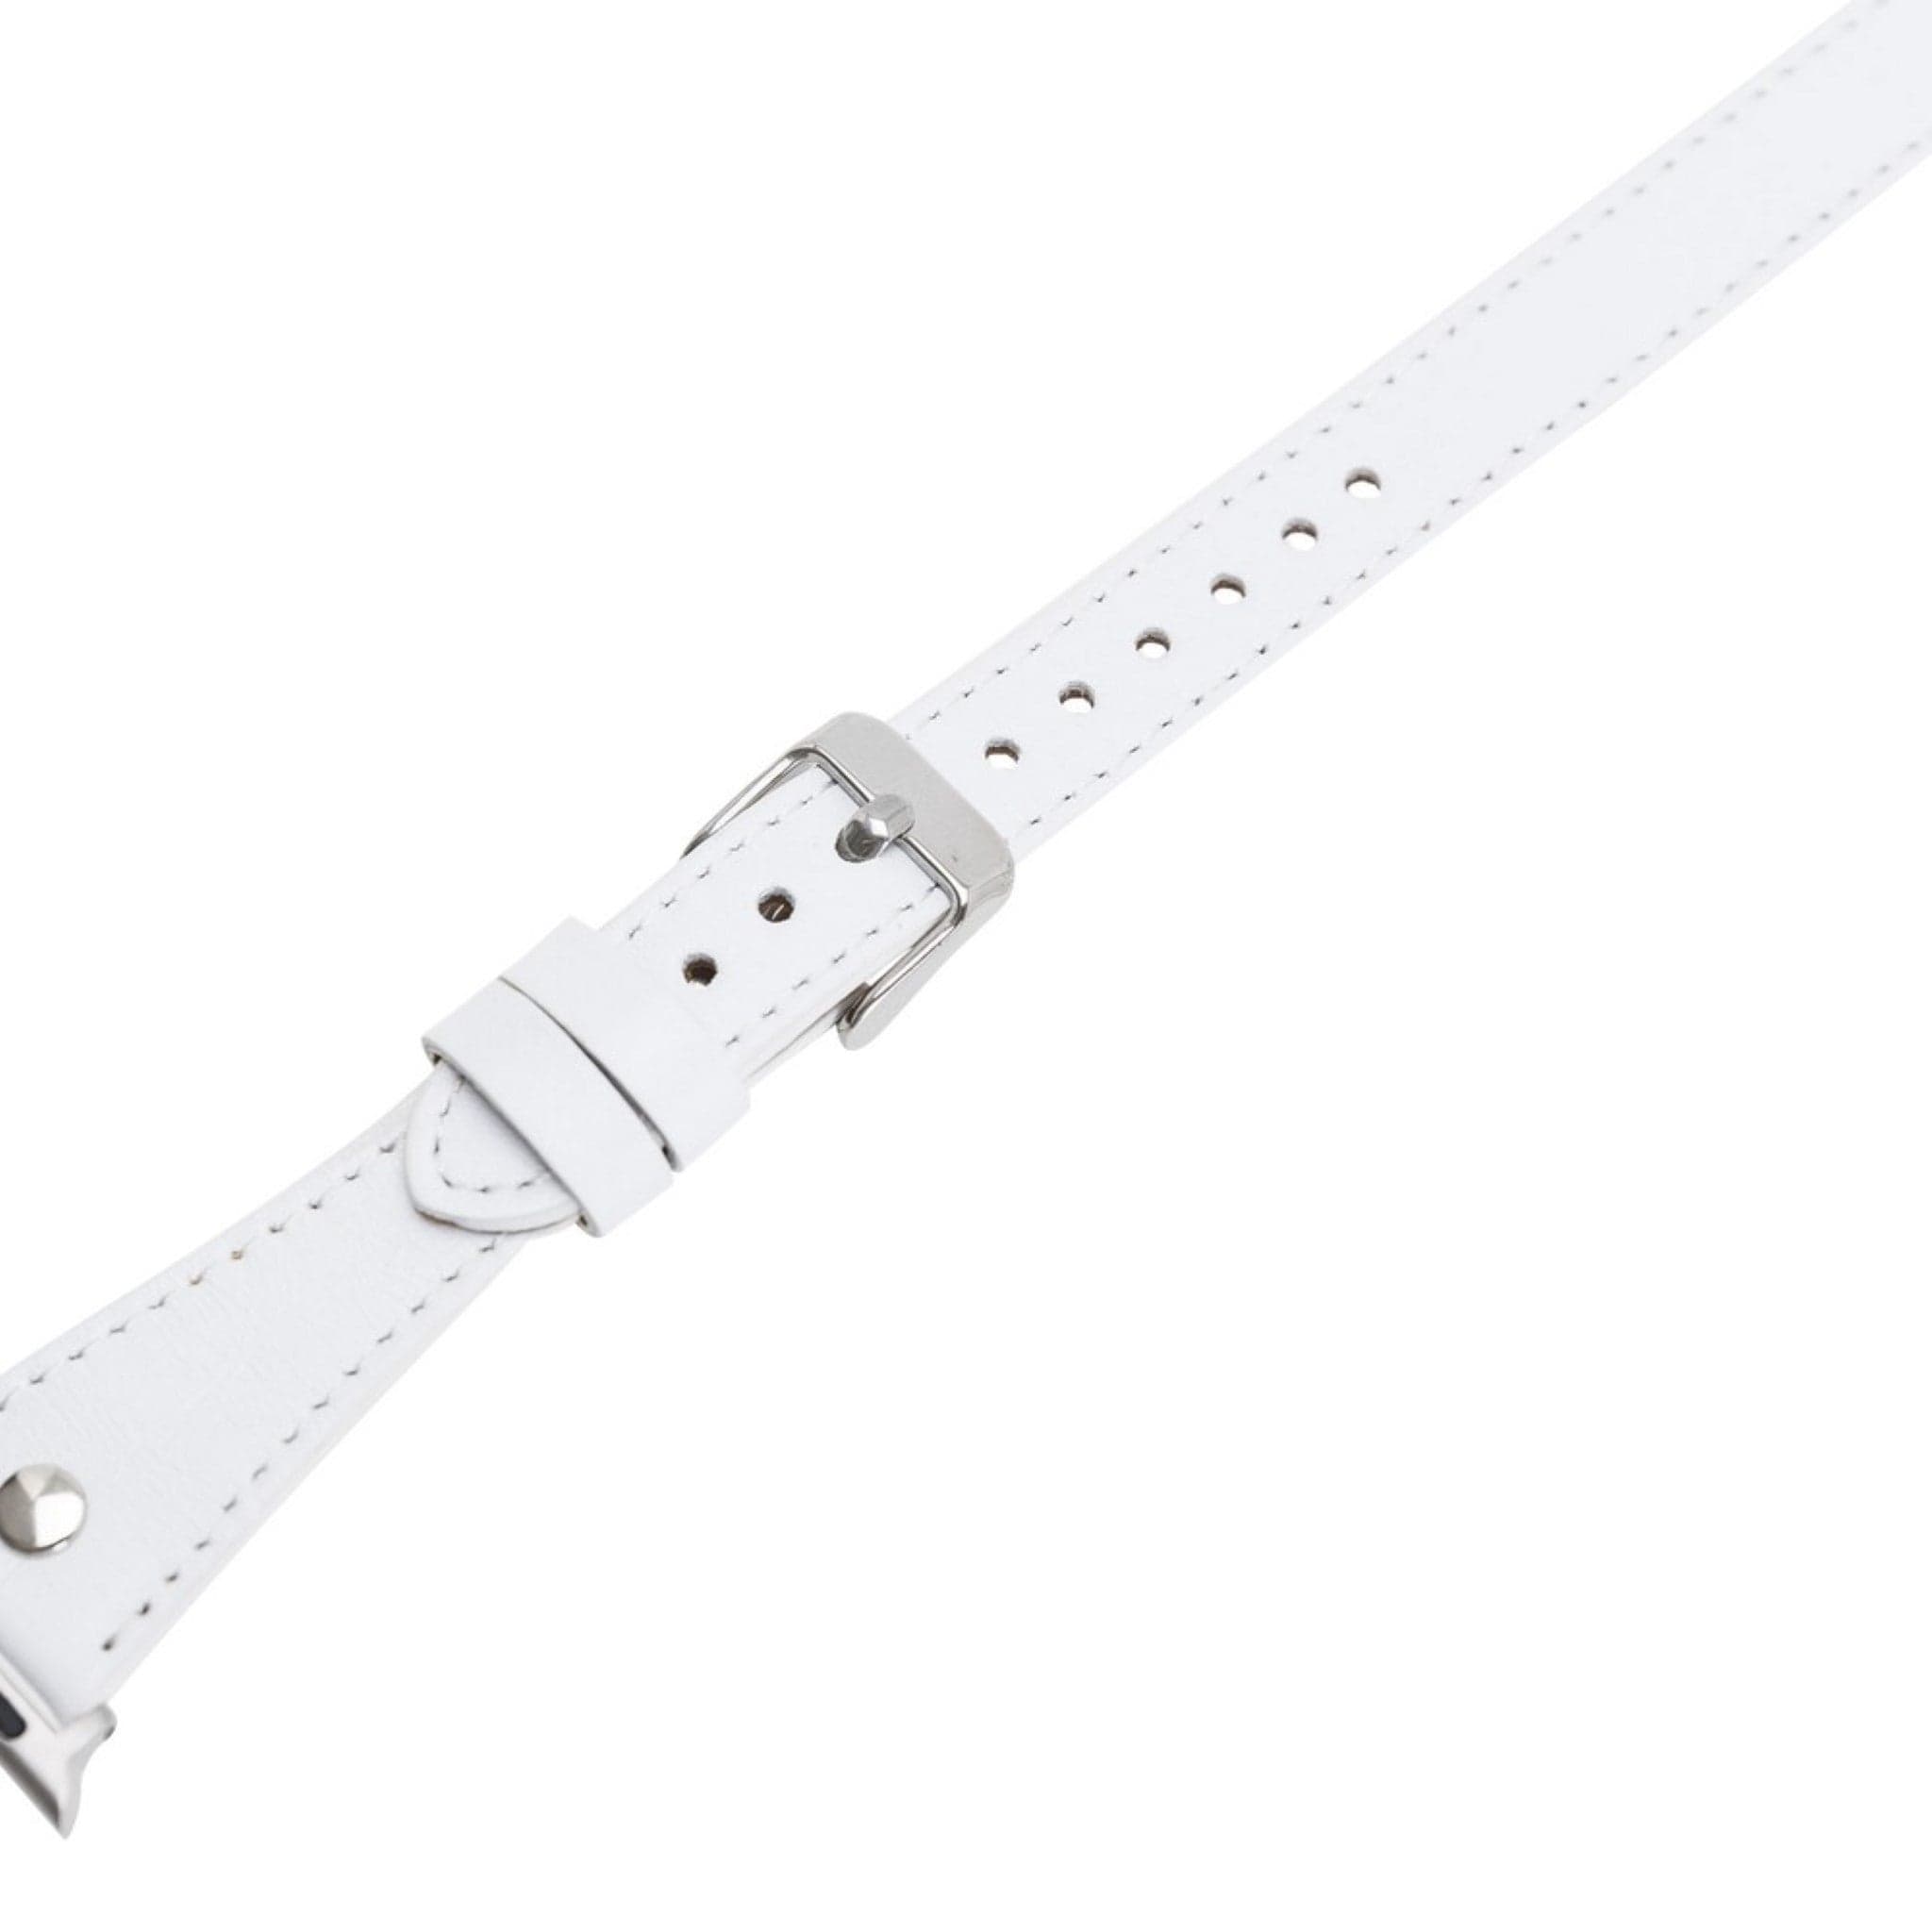 Leeds Double Tour Slim with Silver Bead Apple Watch Leather Straps Bouletta LTD